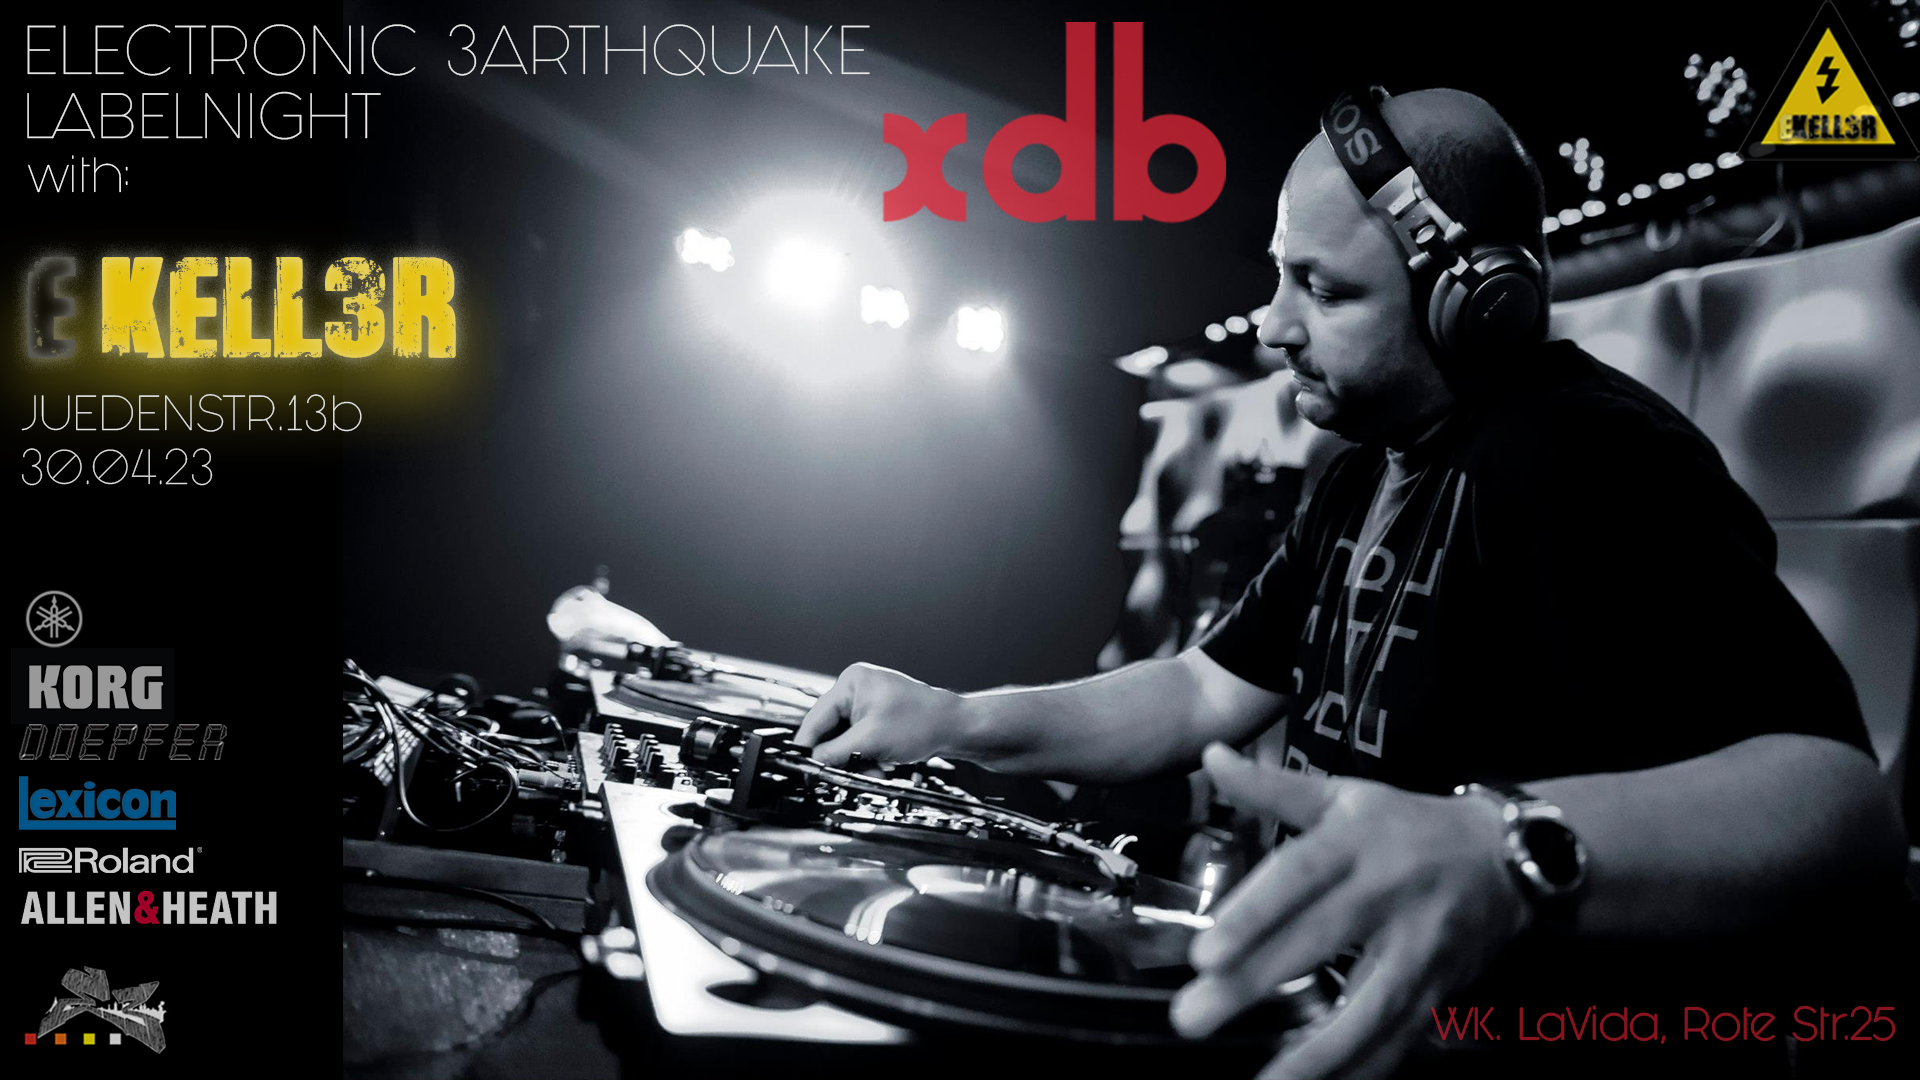 Electronic Earthquake Labelnight with XDB - フライヤー表